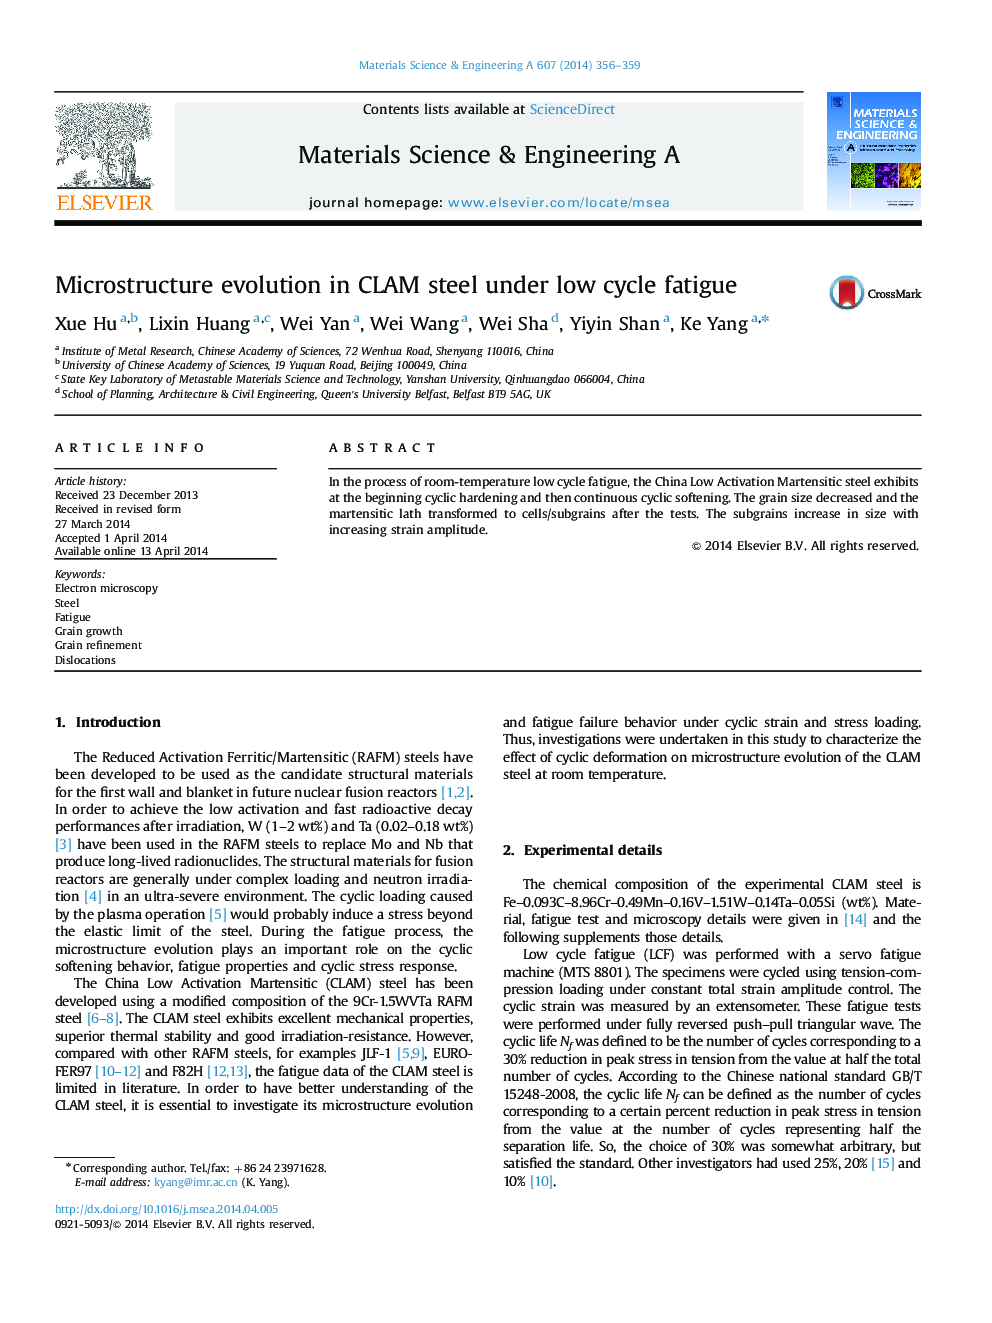 Microstructure evolution in CLAM steel under low cycle fatigue